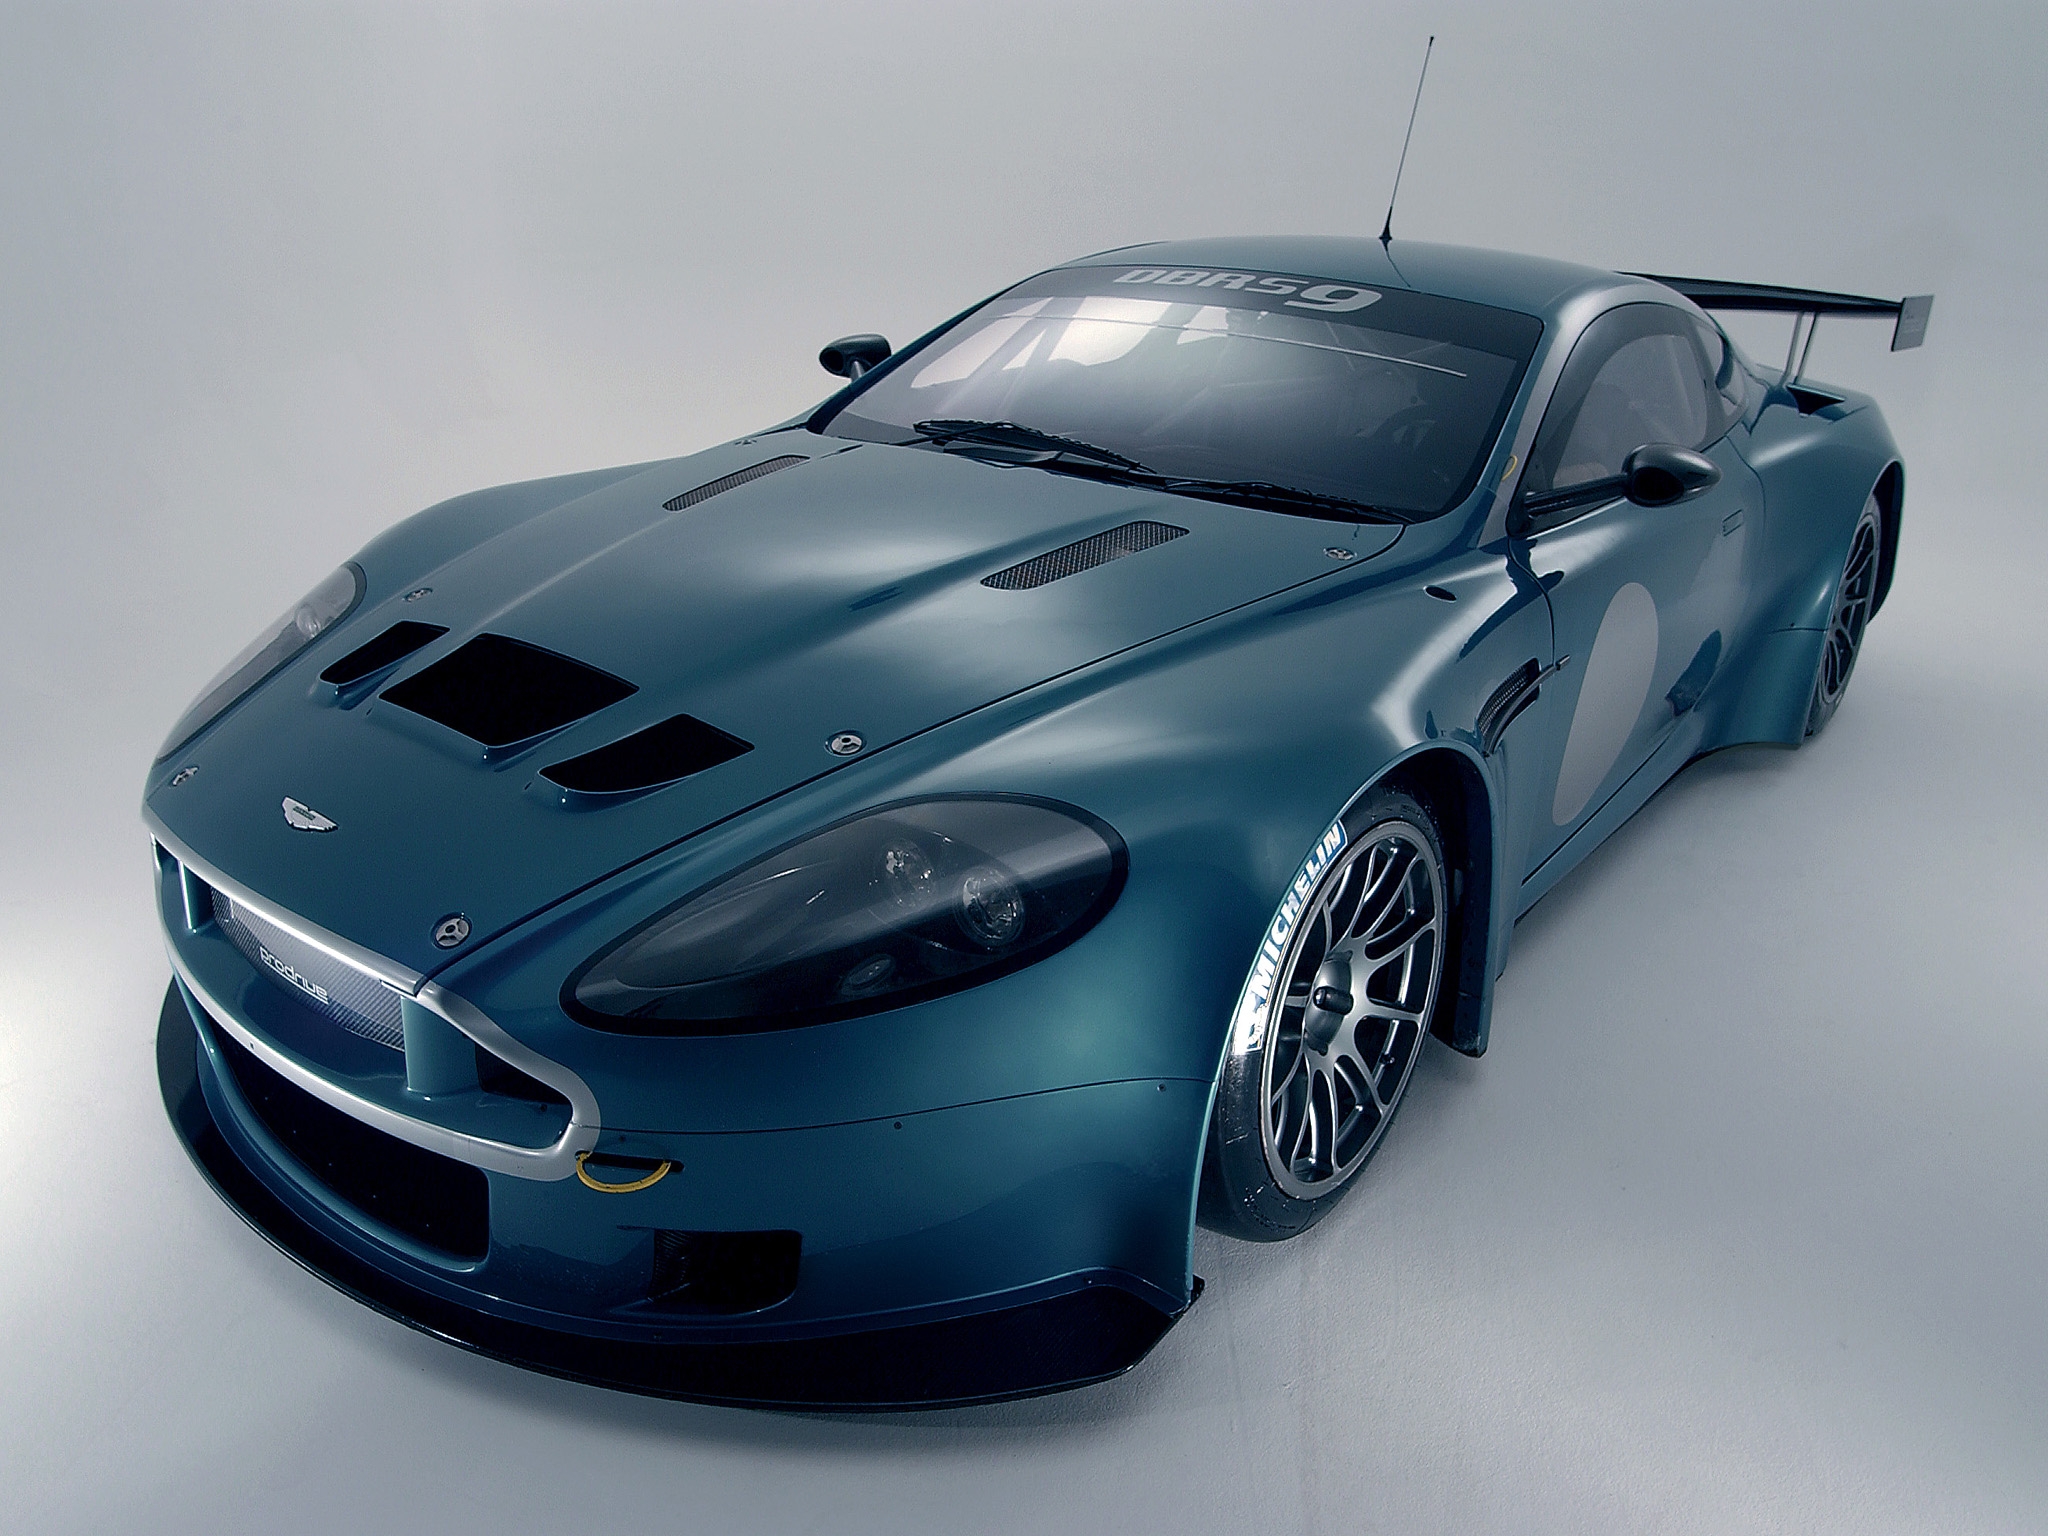 New Lock Screen Wallpapers sports, auto, aston martin, cars, green, front view, style, 2005, dbrs9